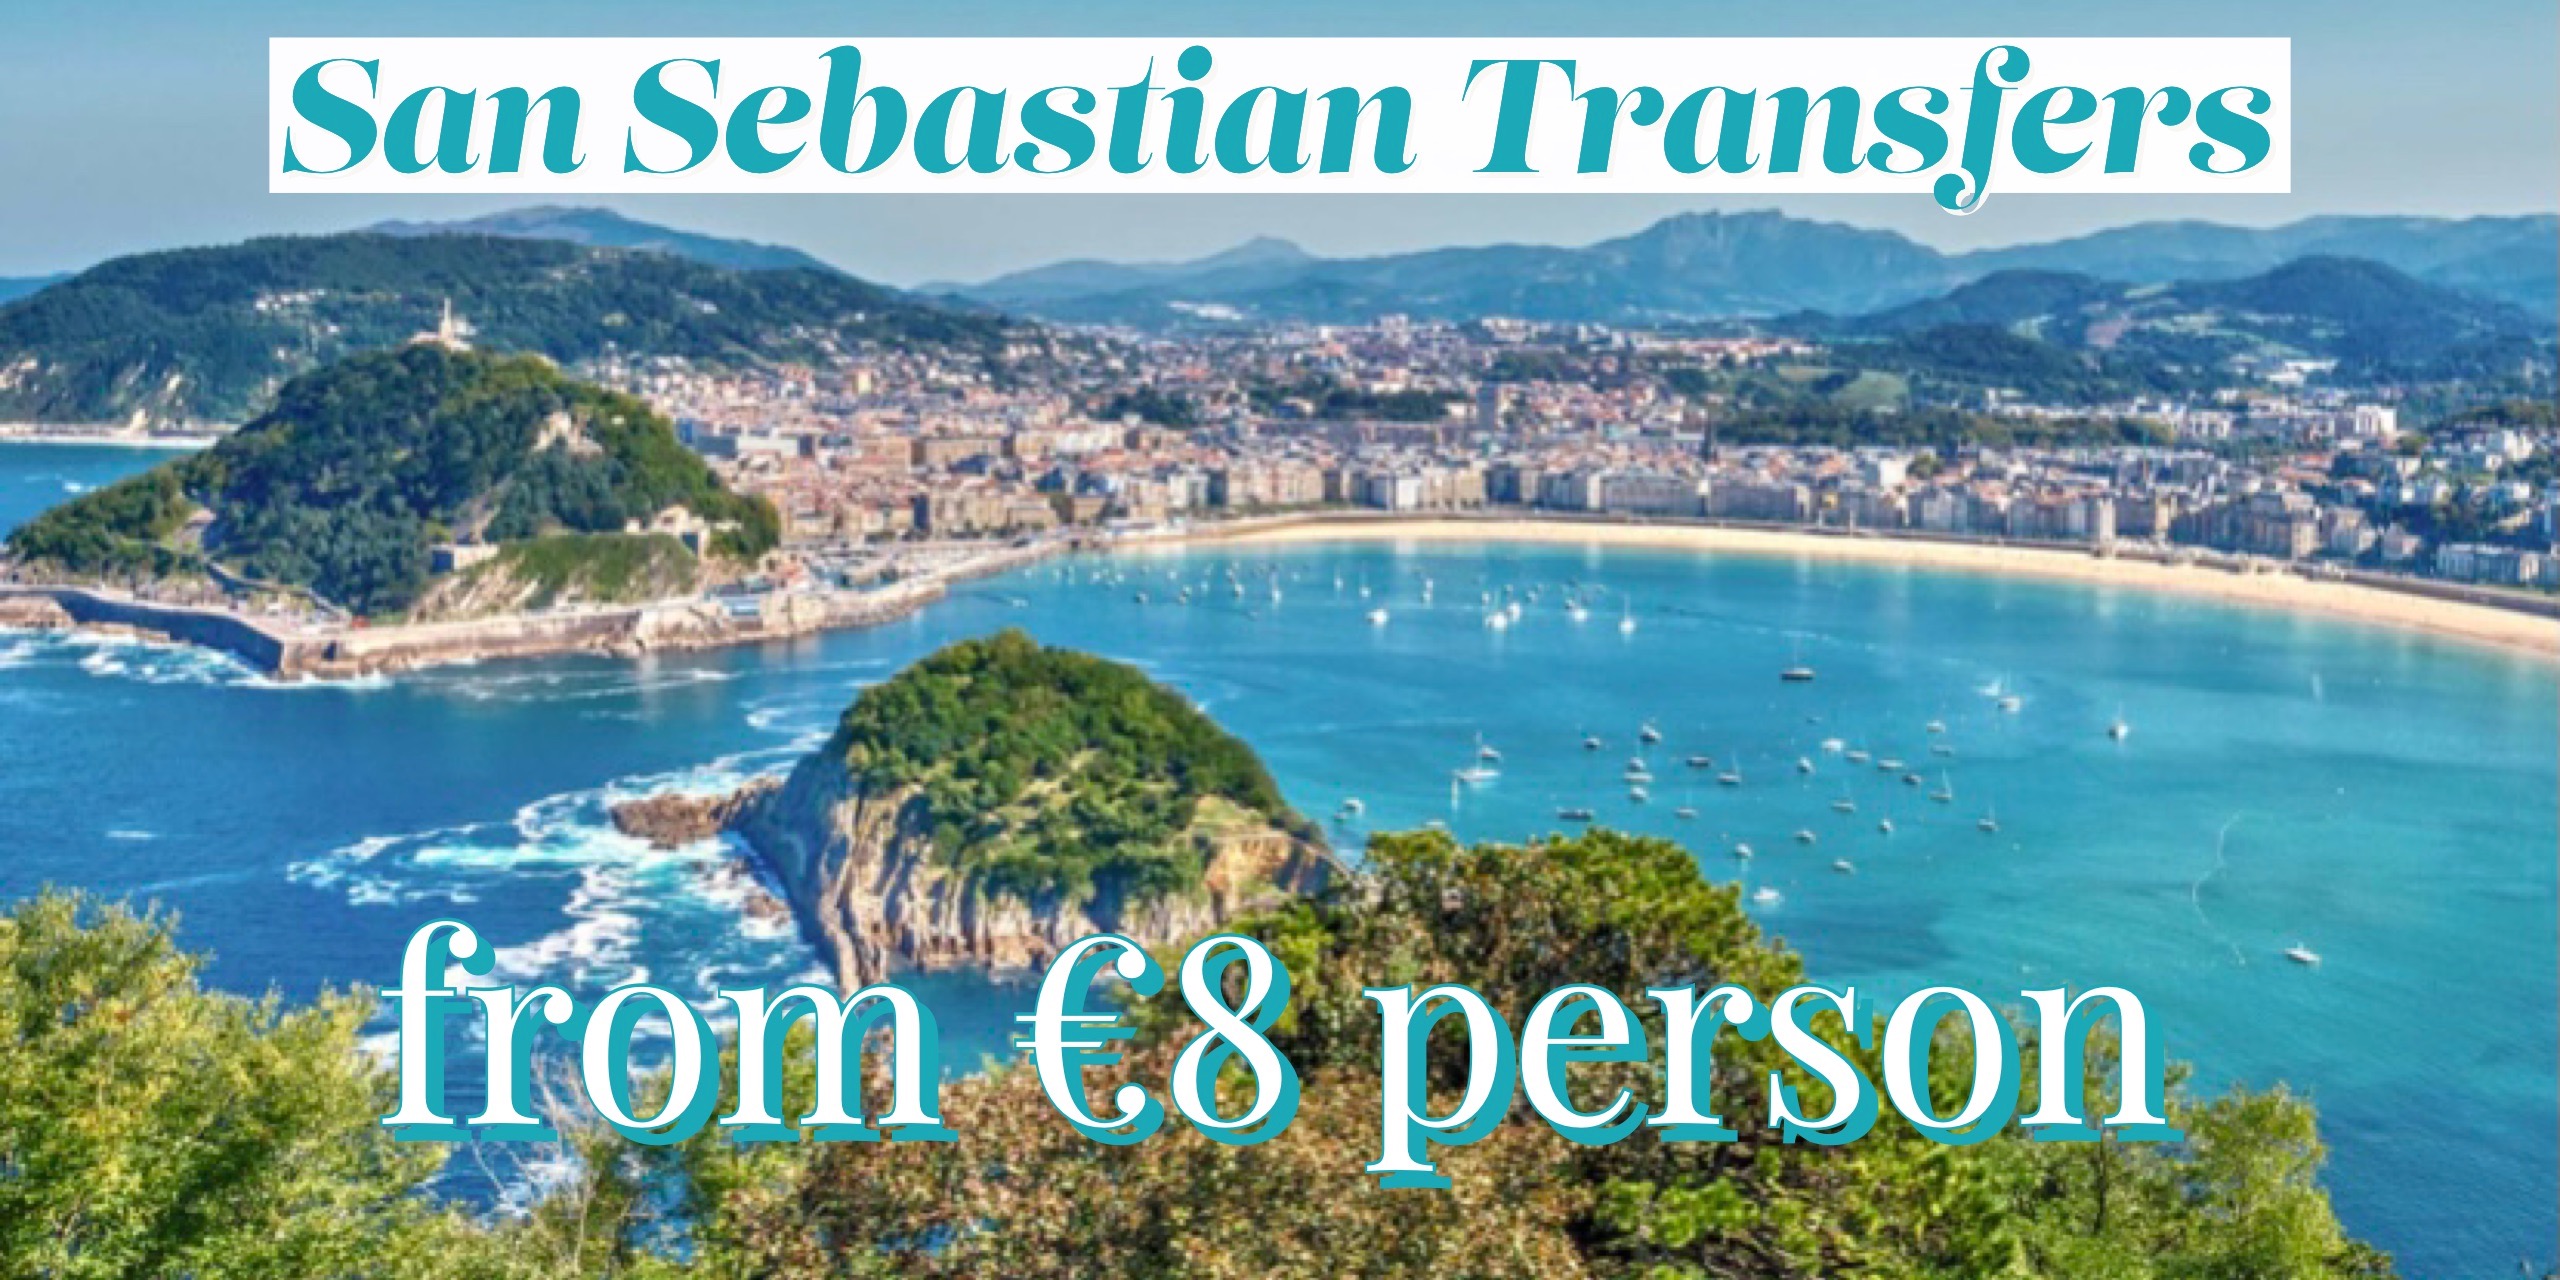 Transfers from San Sebastian Airport Prices